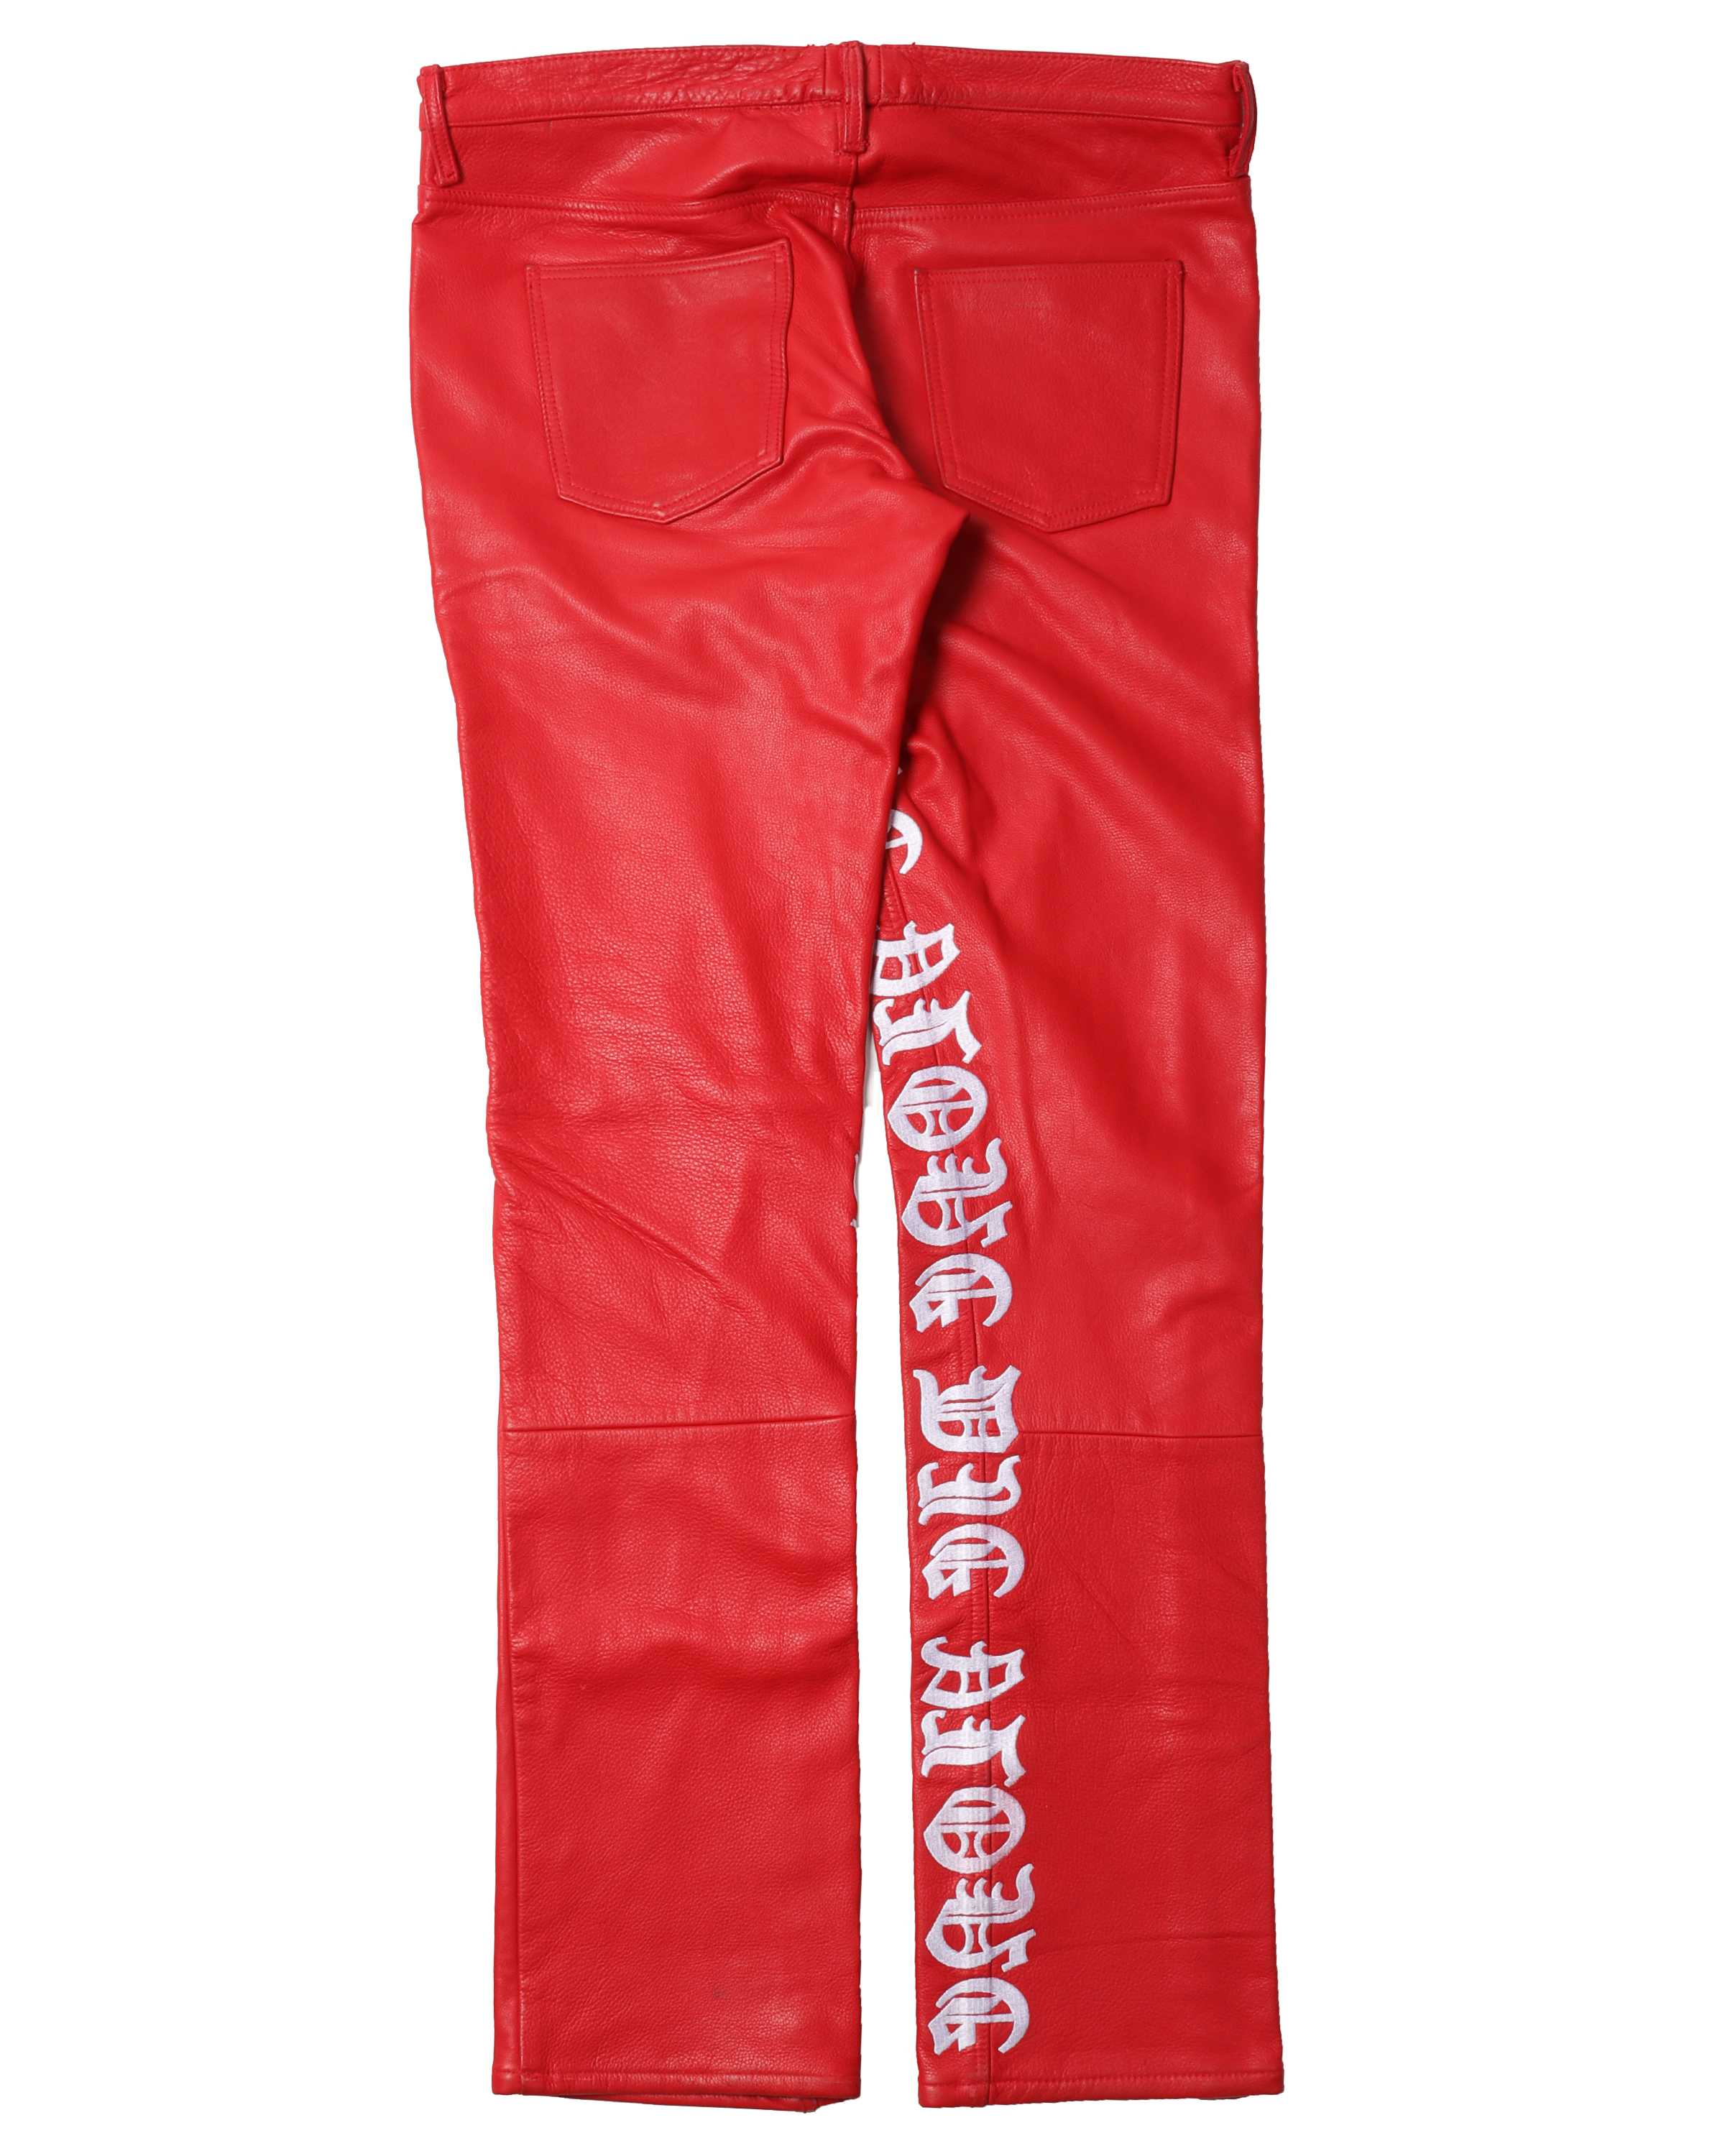 Sample Leather Red Pants